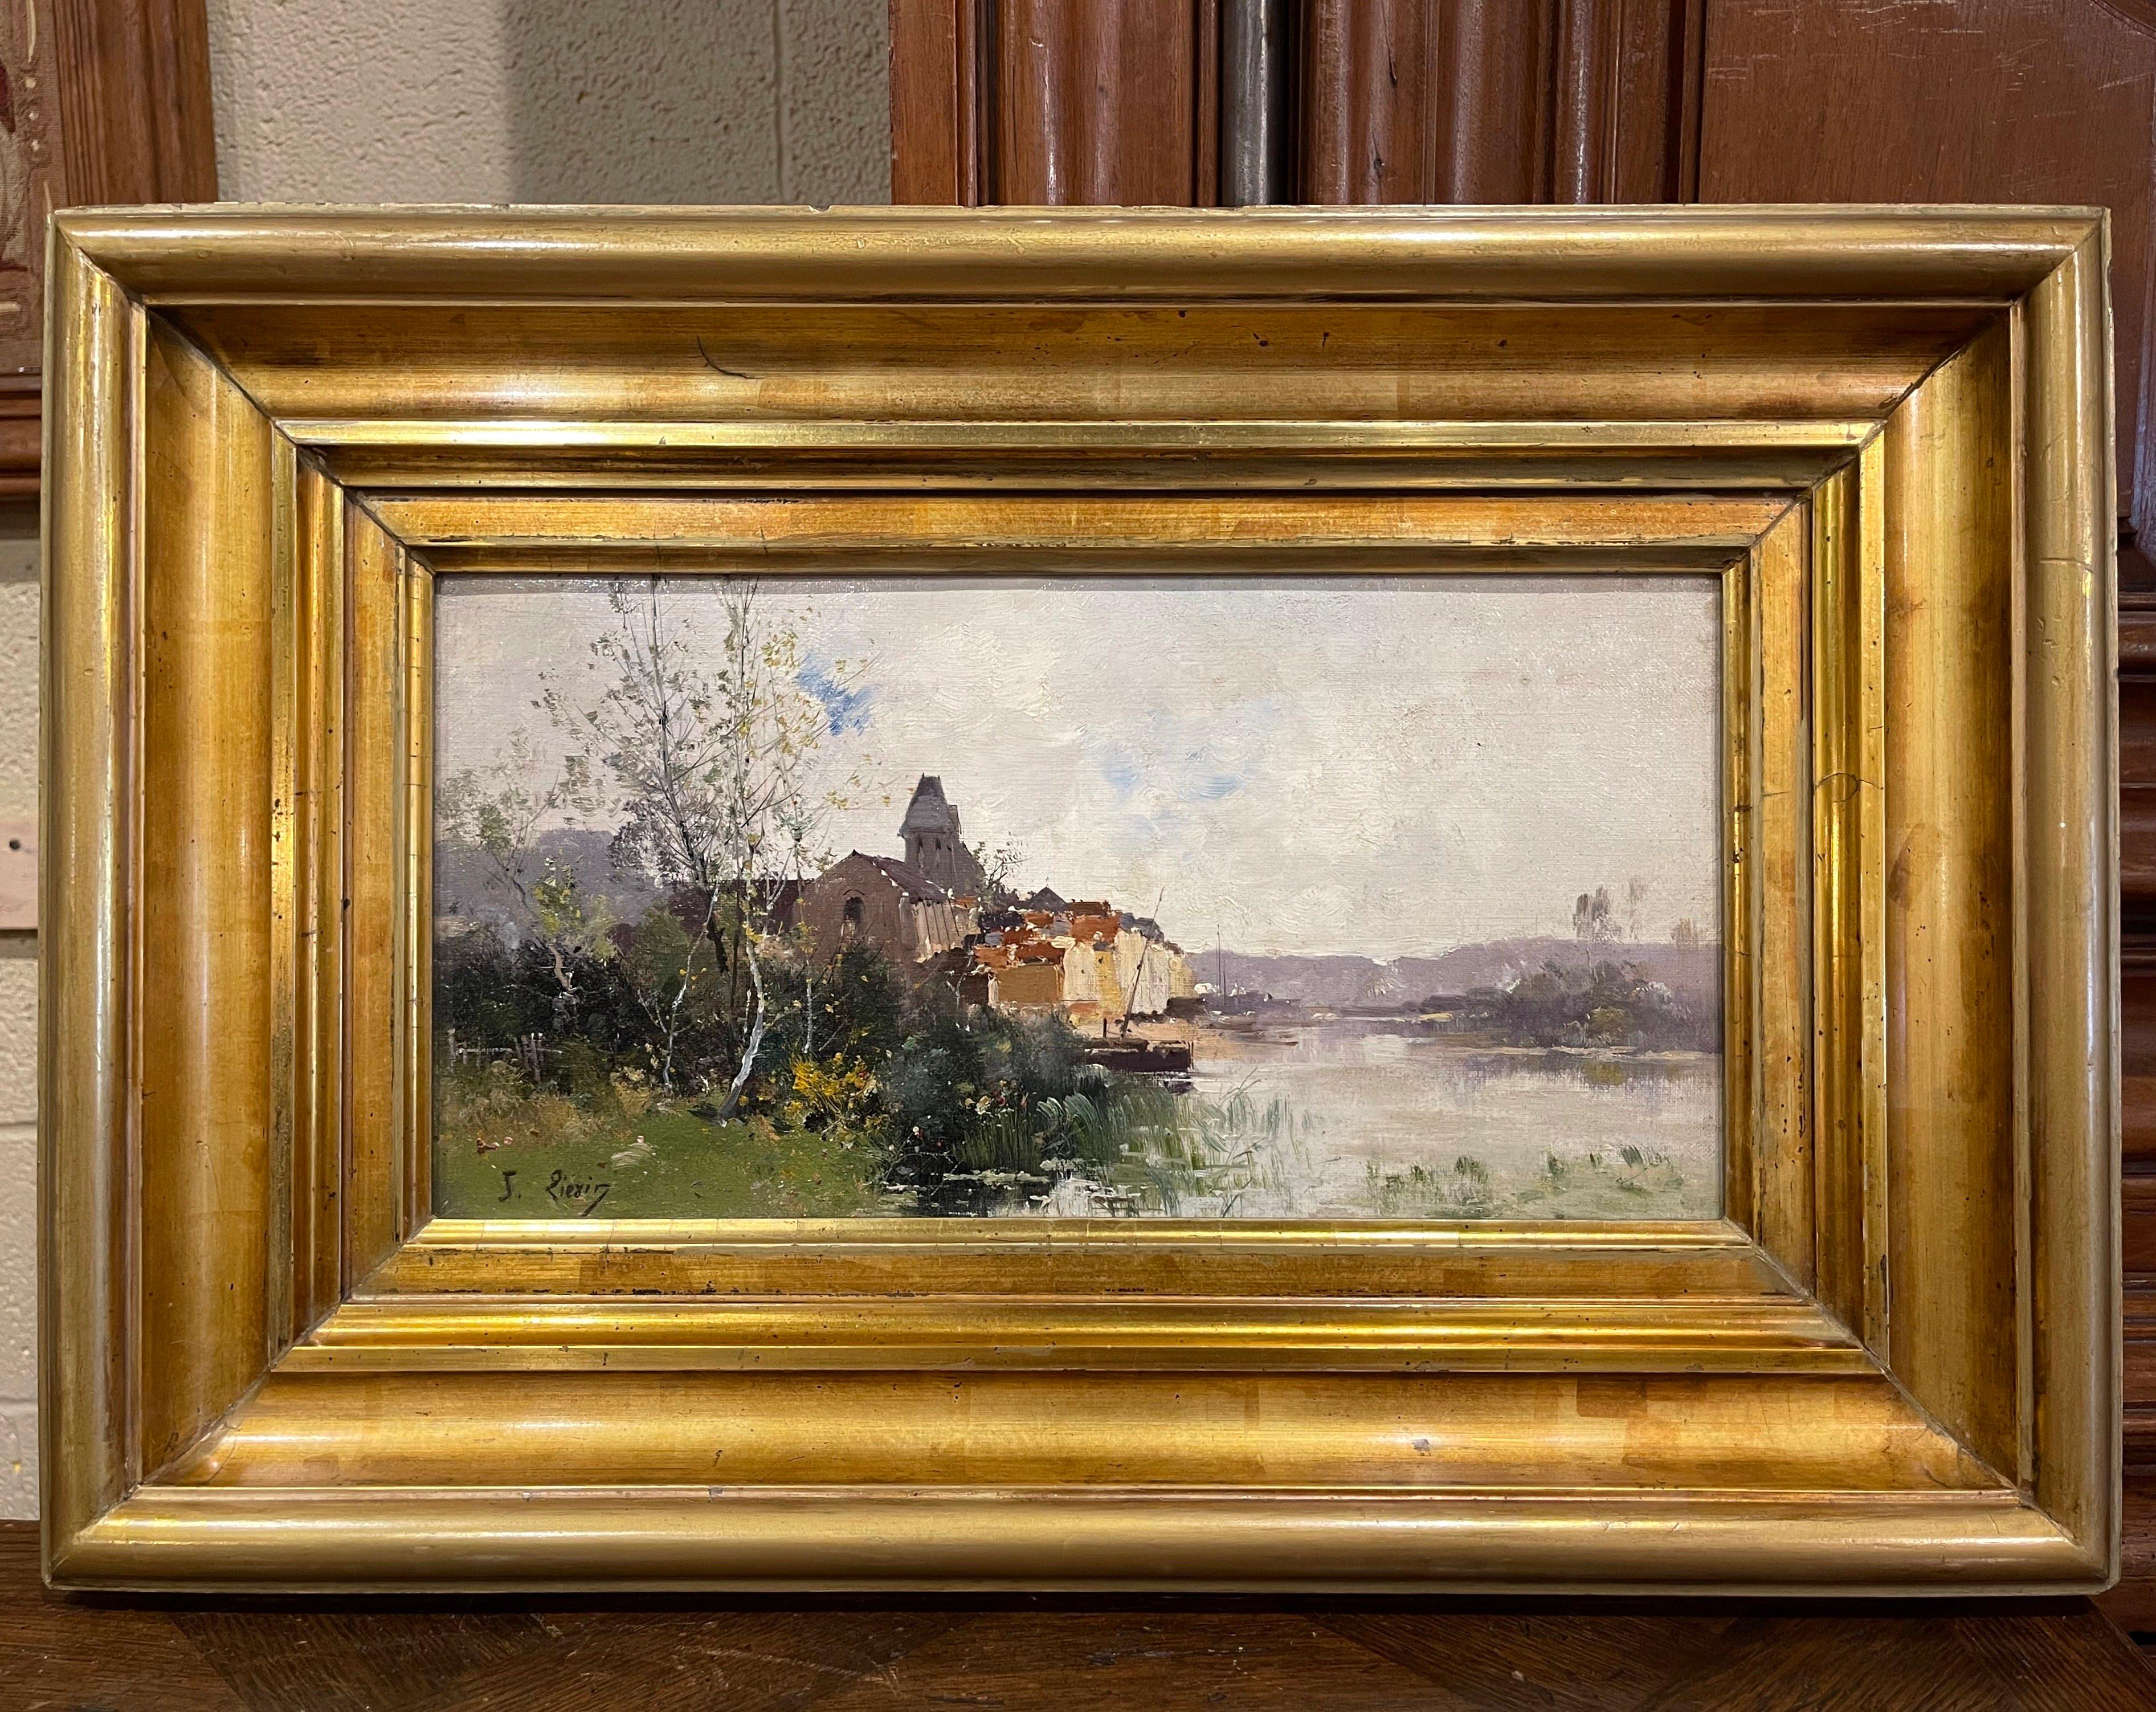 19th Century Framed Landscape Oil Painting Signed J. Lievin for E. Galien-Laloue For Sale 1